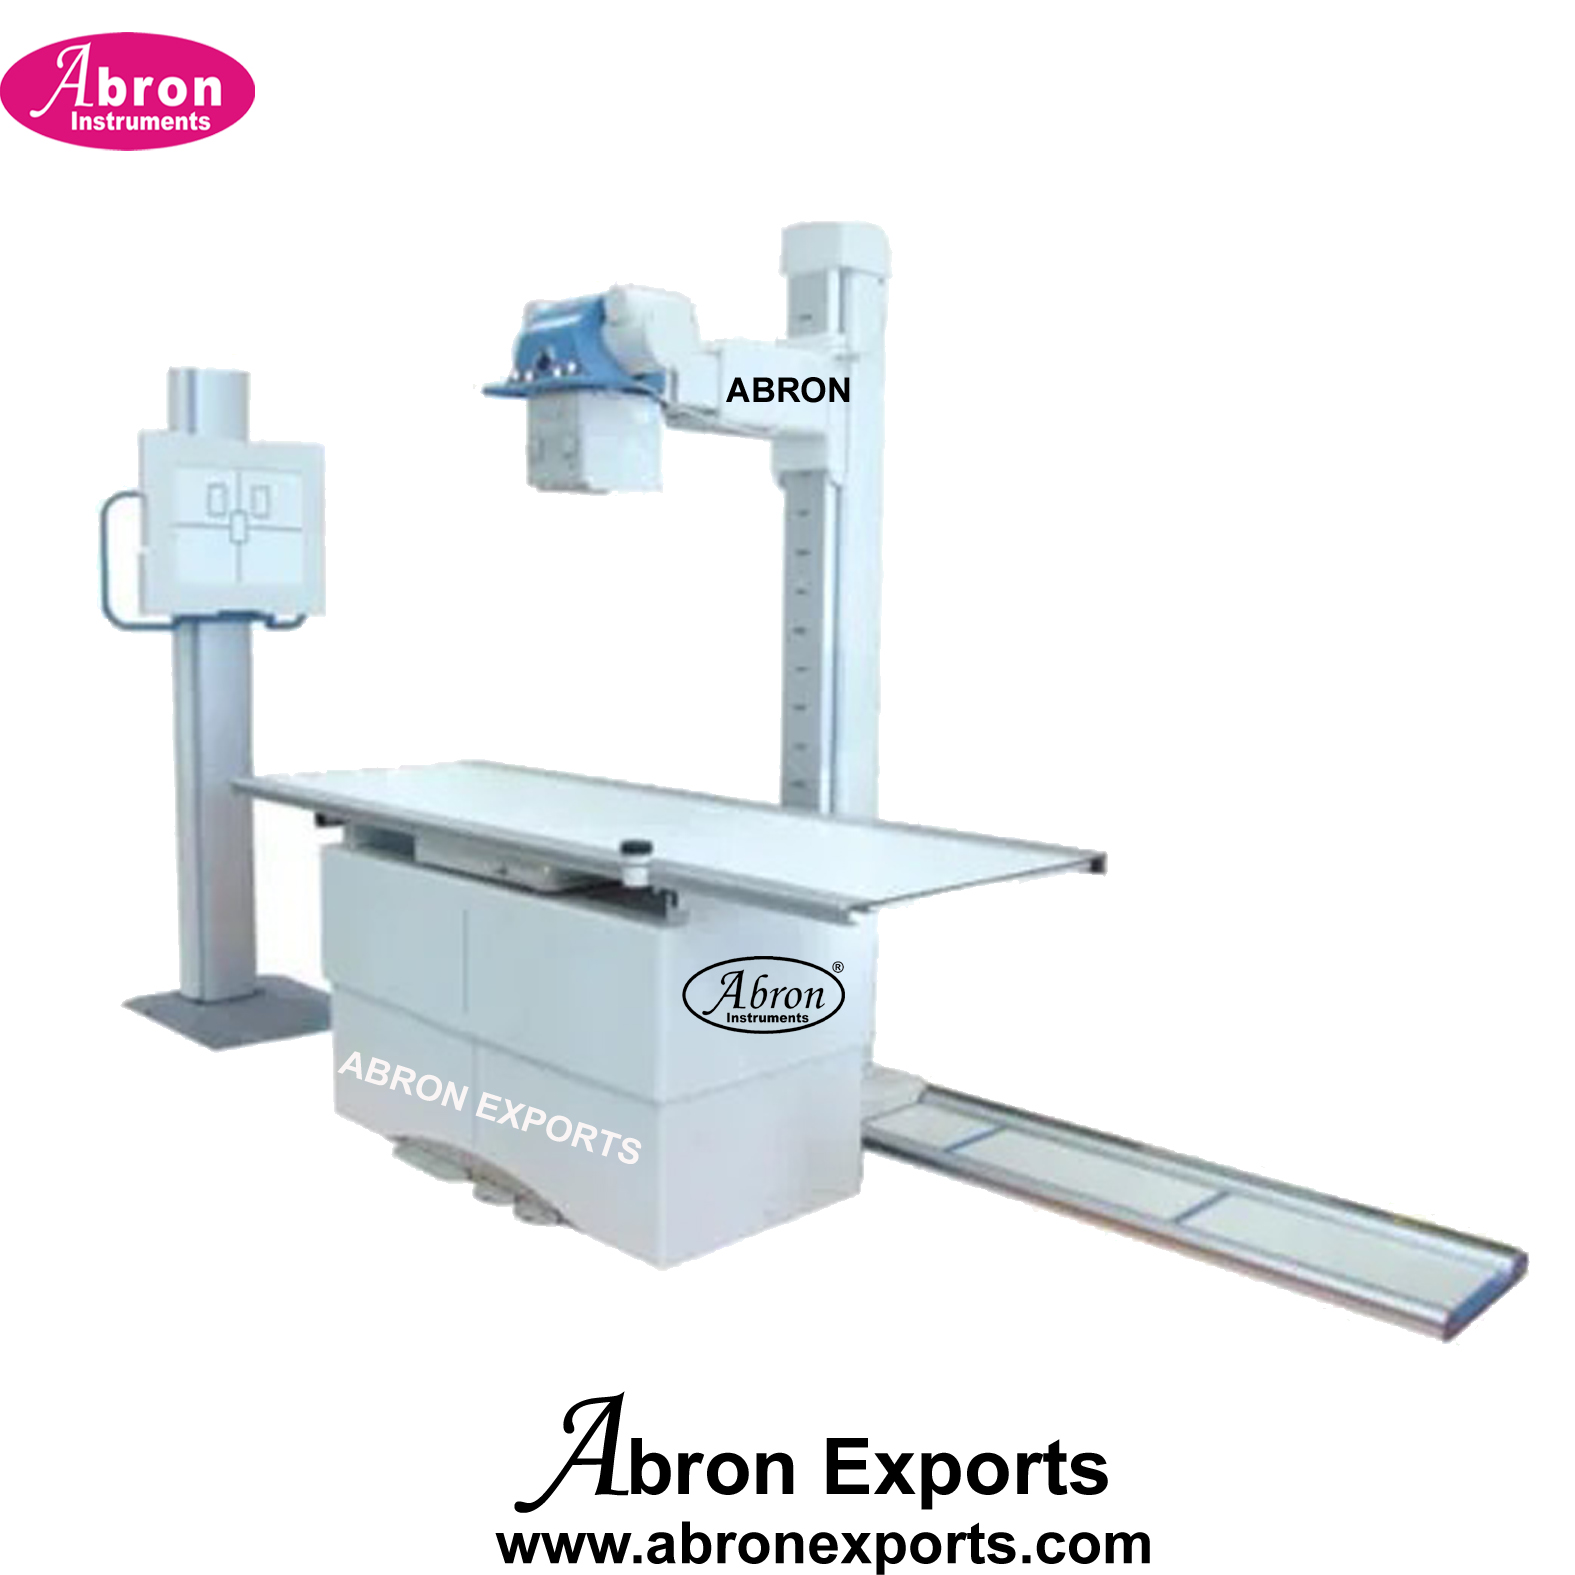 Ortho x-ray machine 160mA fixed with controller and stand platform setup Nursing Home Hospital Abron ABM-2782F16H 